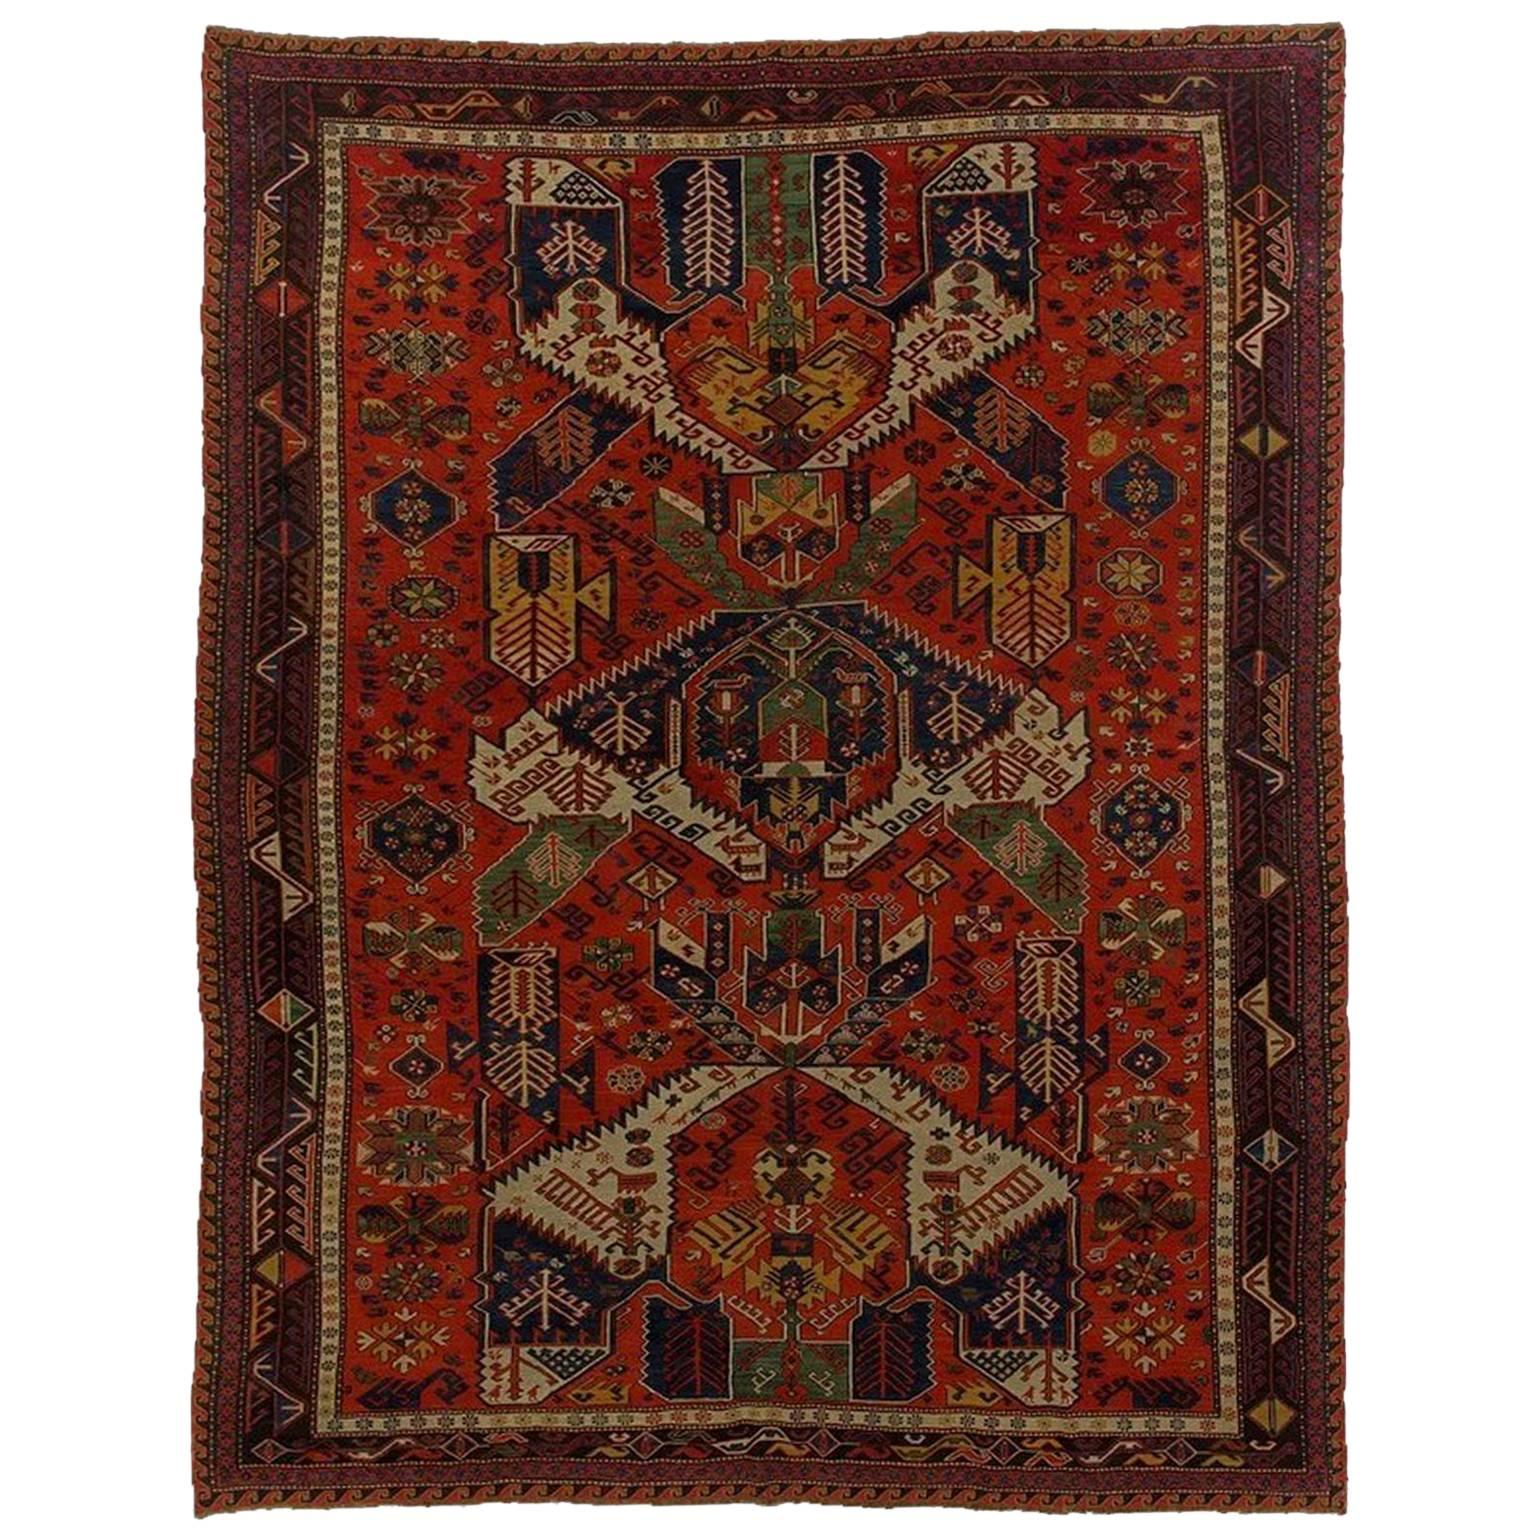 19th Century Caucasian Dragon Sumak Rug Hand-Knotted in Wool Red Green Yellow